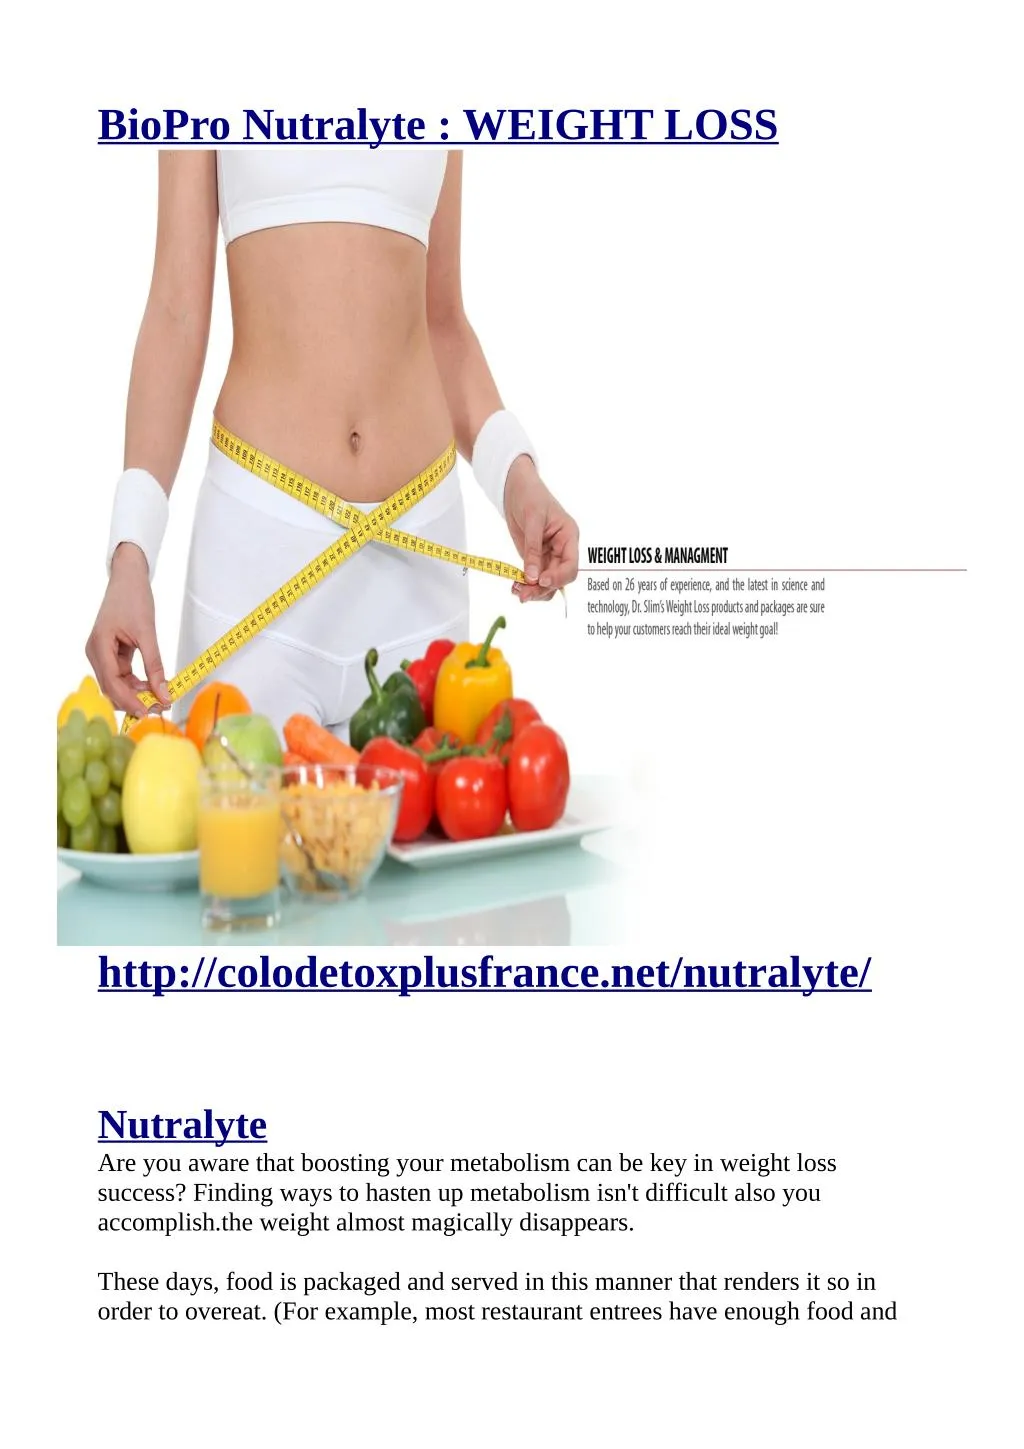 biopro nutralyte weight loss